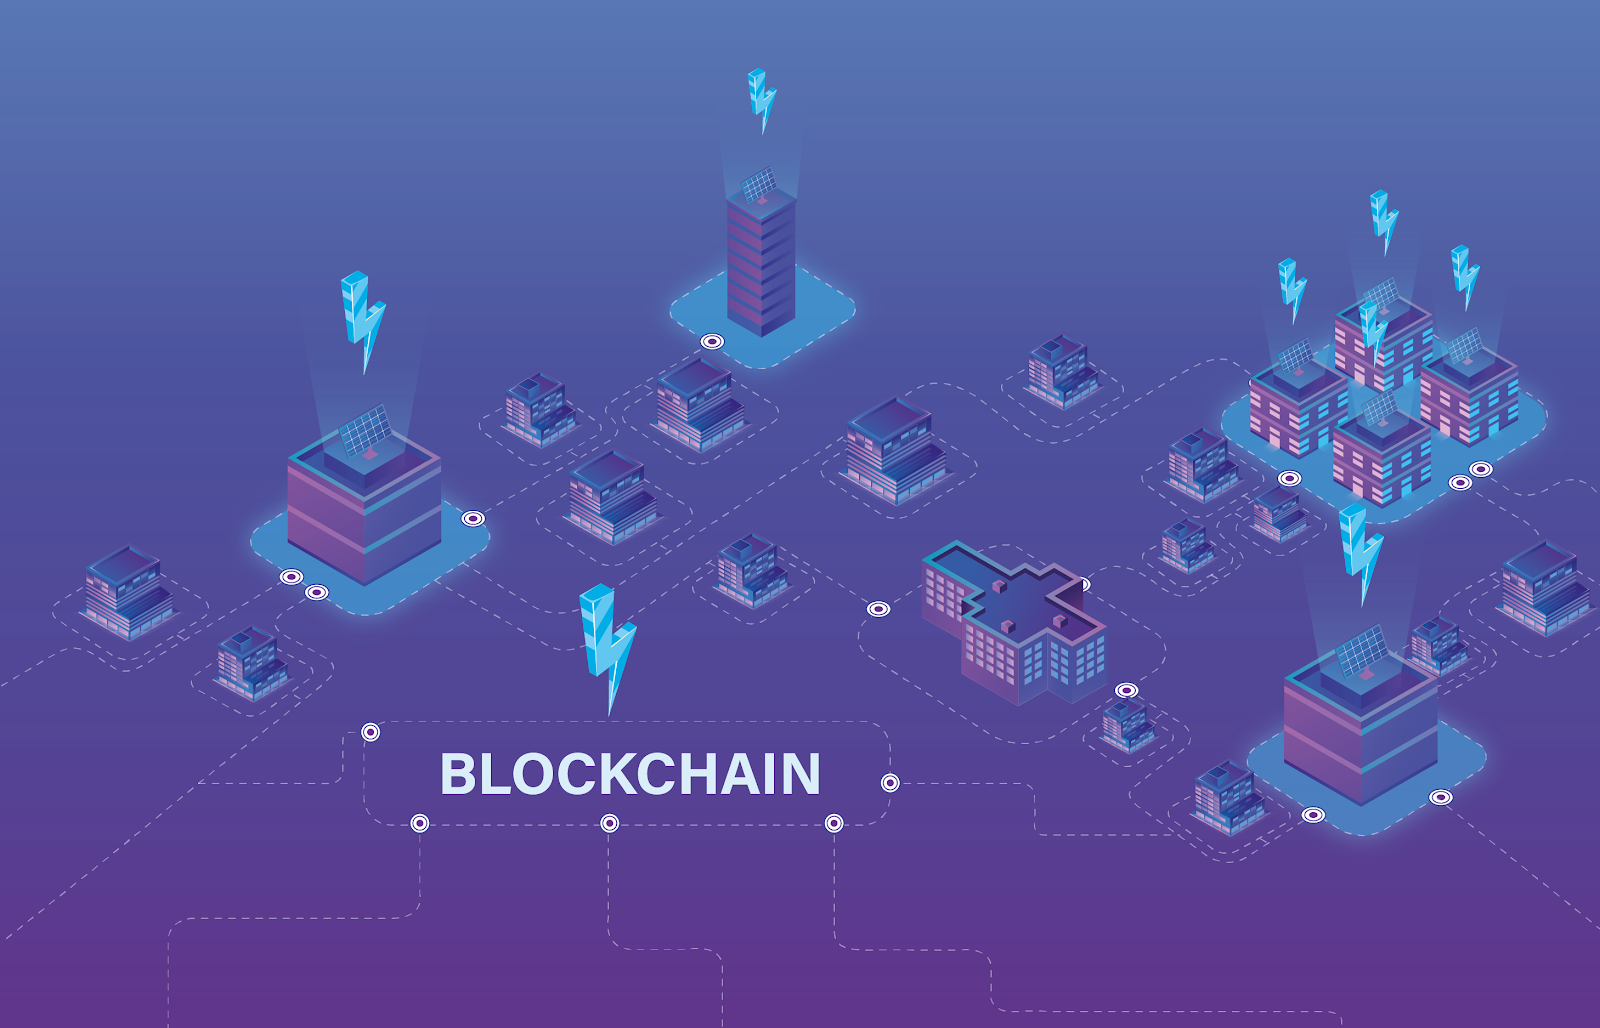 Projects Leveraging Blockchain